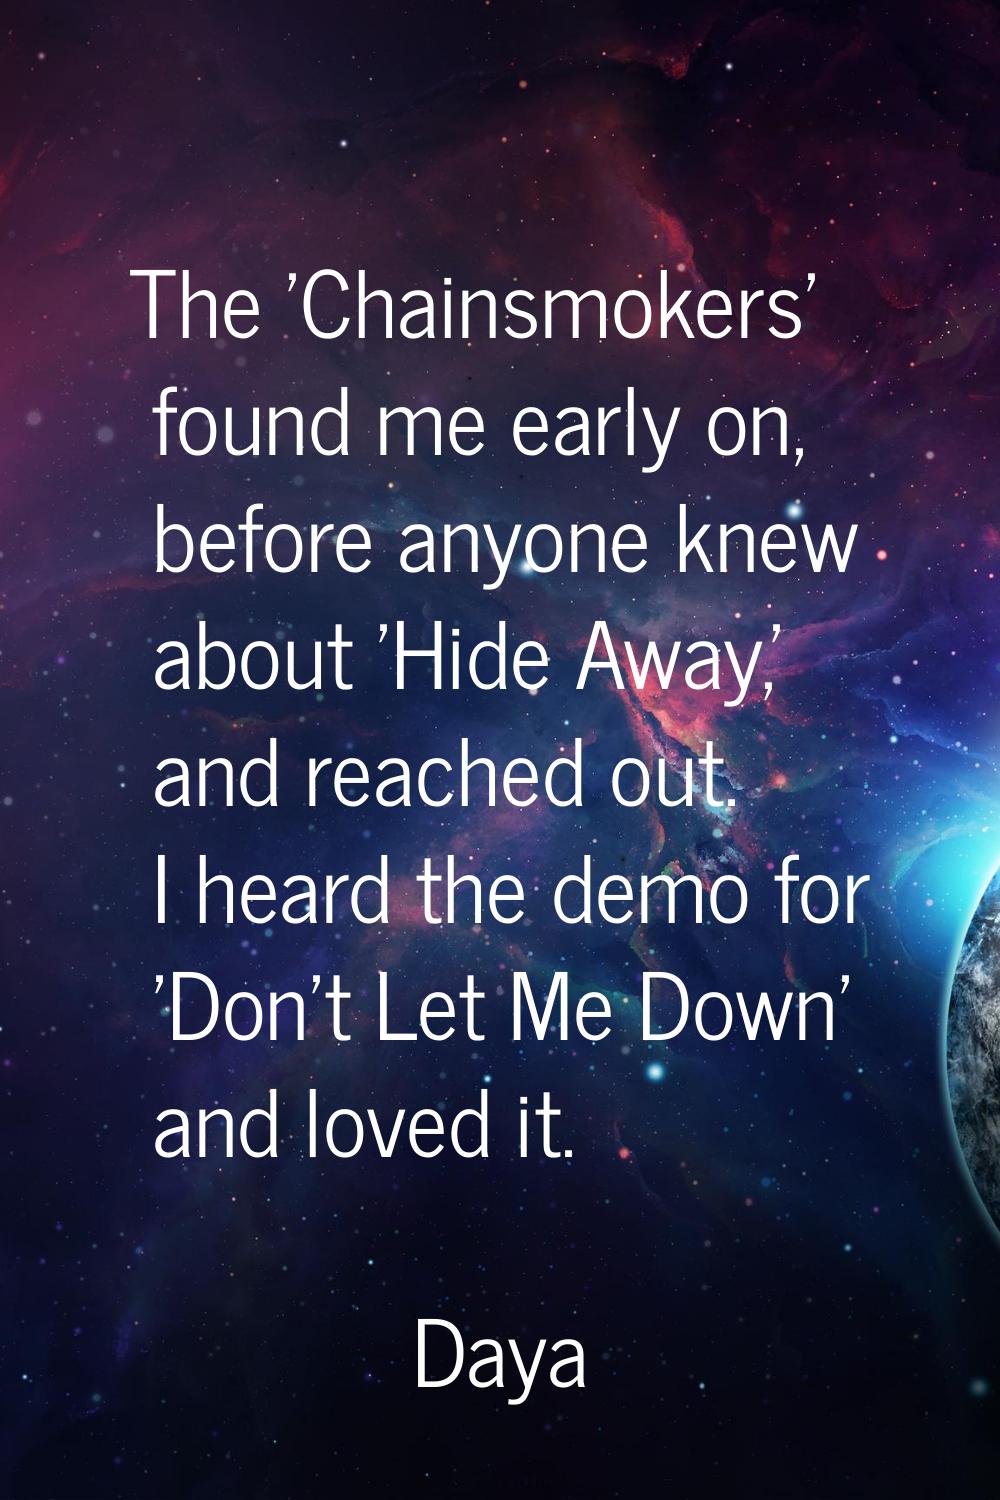 The 'Chainsmokers' found me early on, before anyone knew about 'Hide Away,' and reached out. I hear